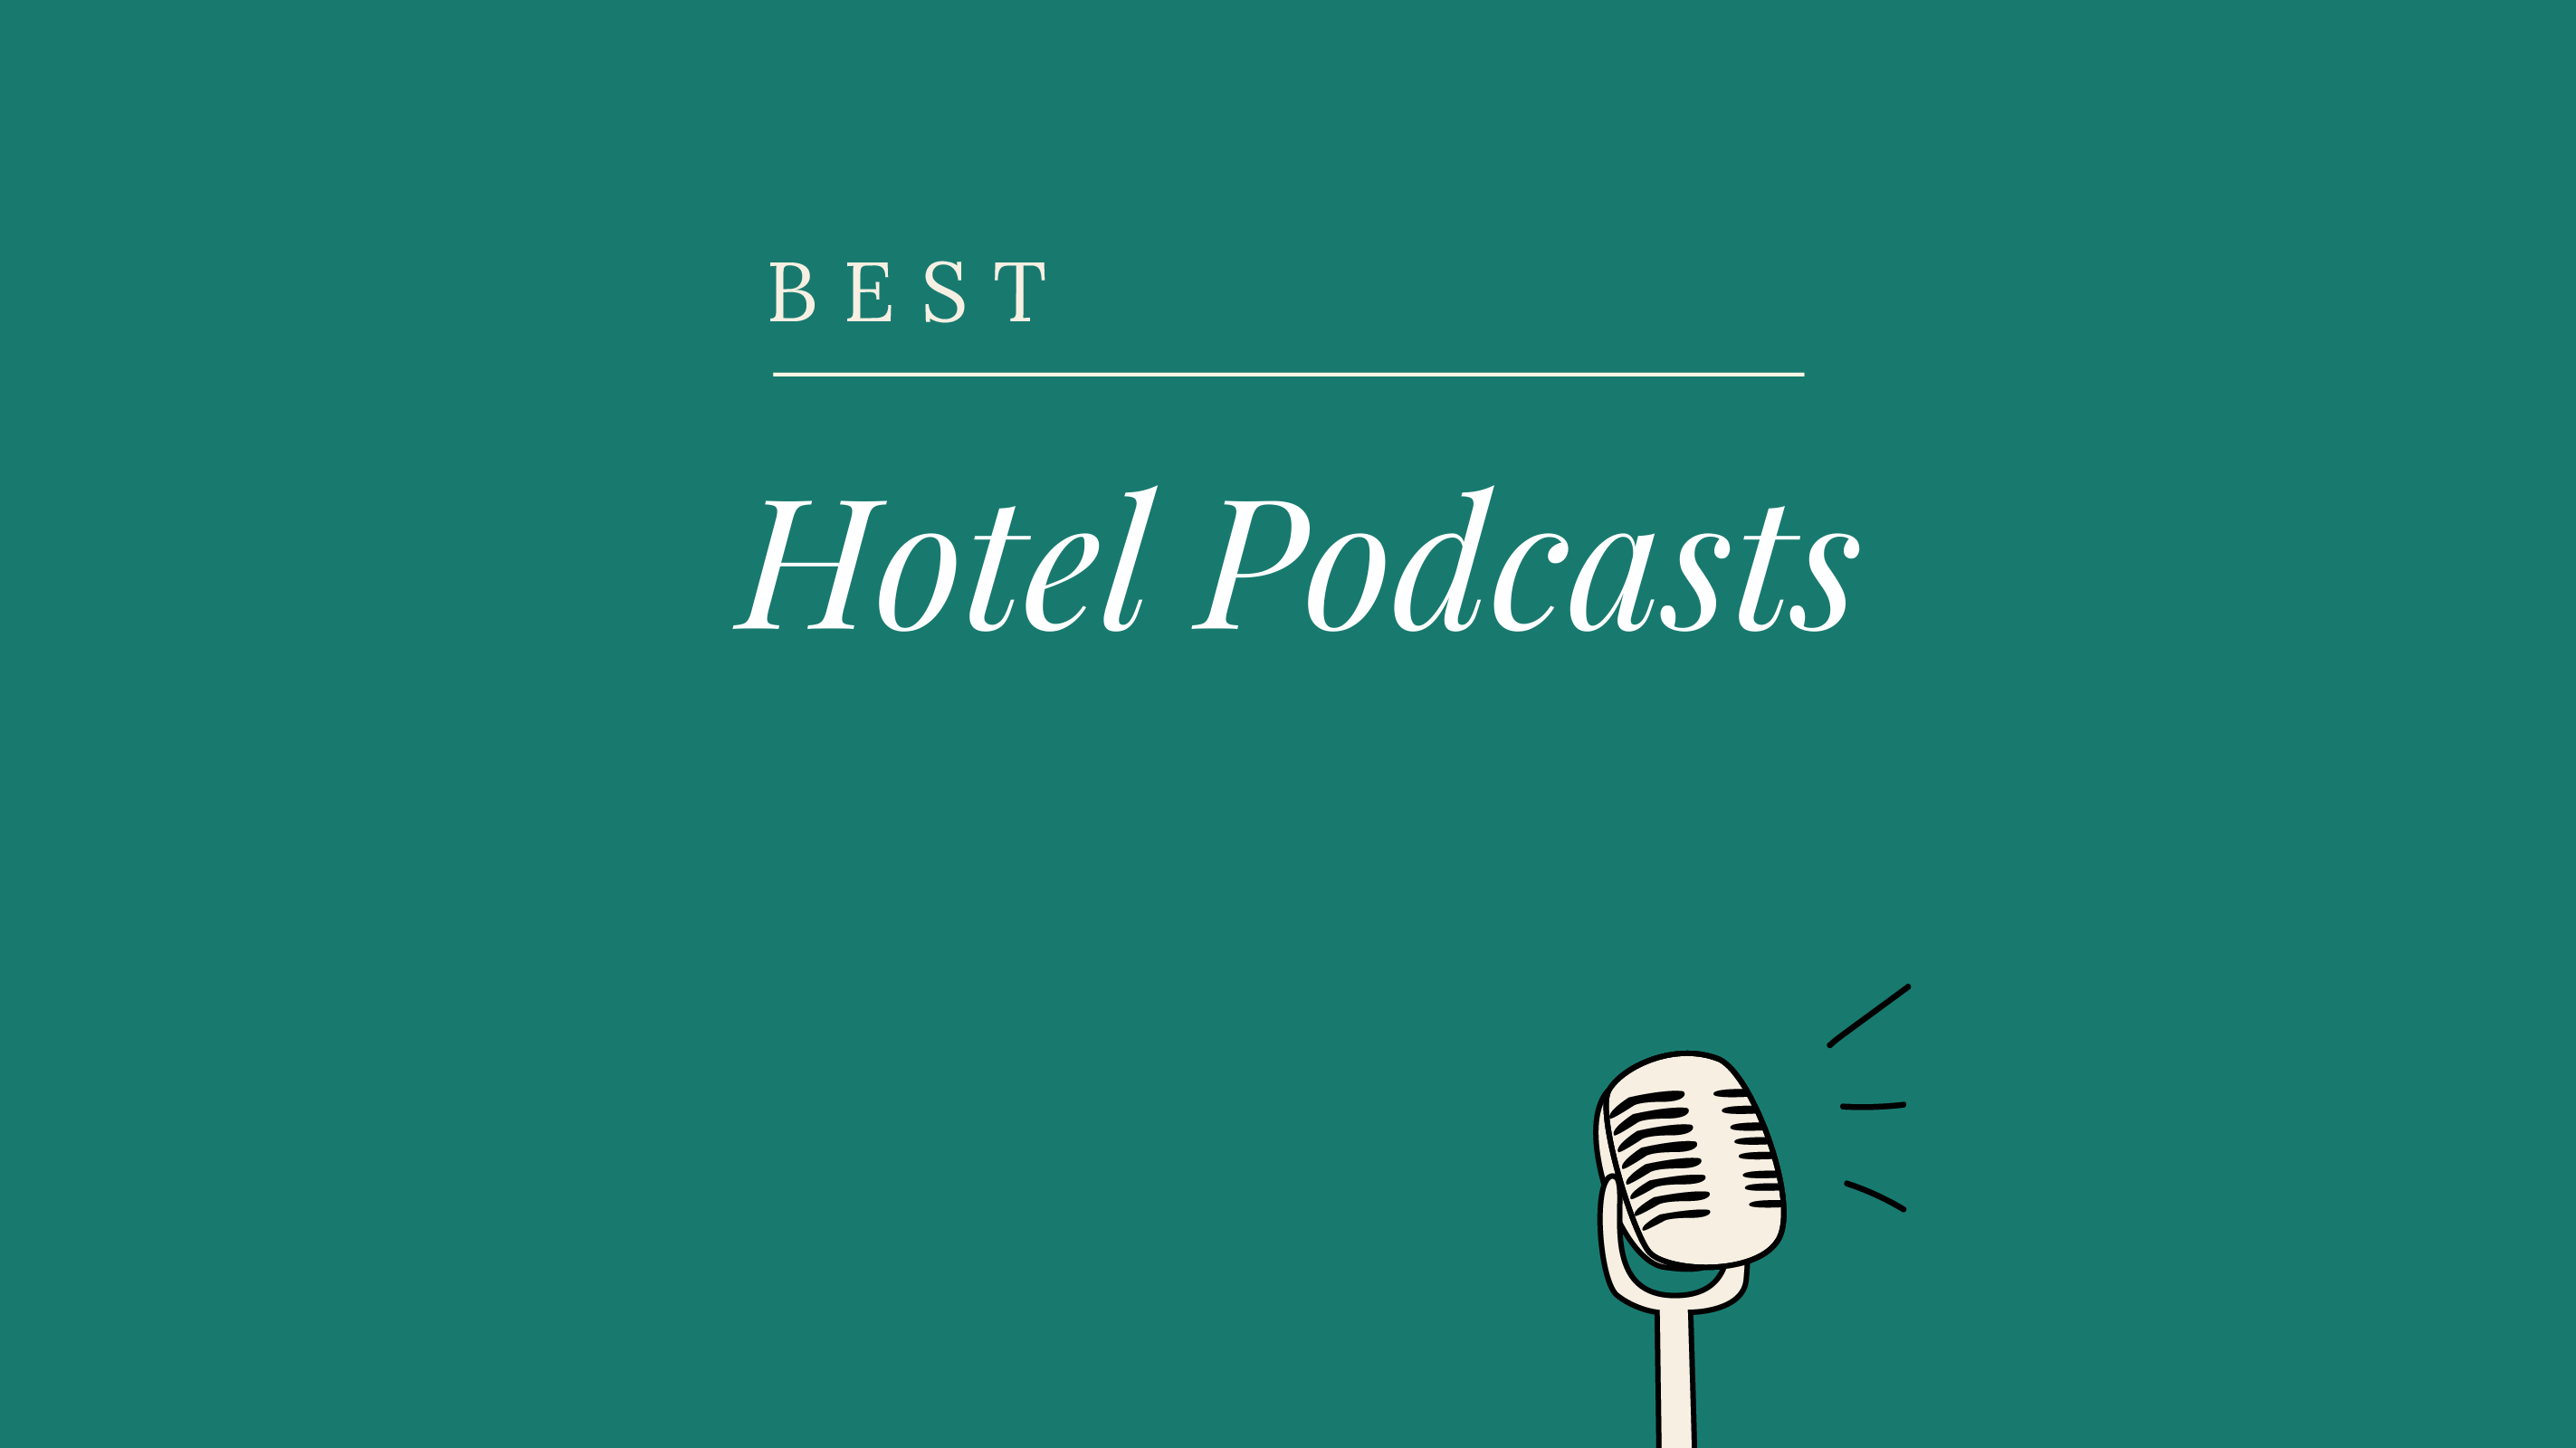 HOT-hotel-podcasts-featured-image-1997